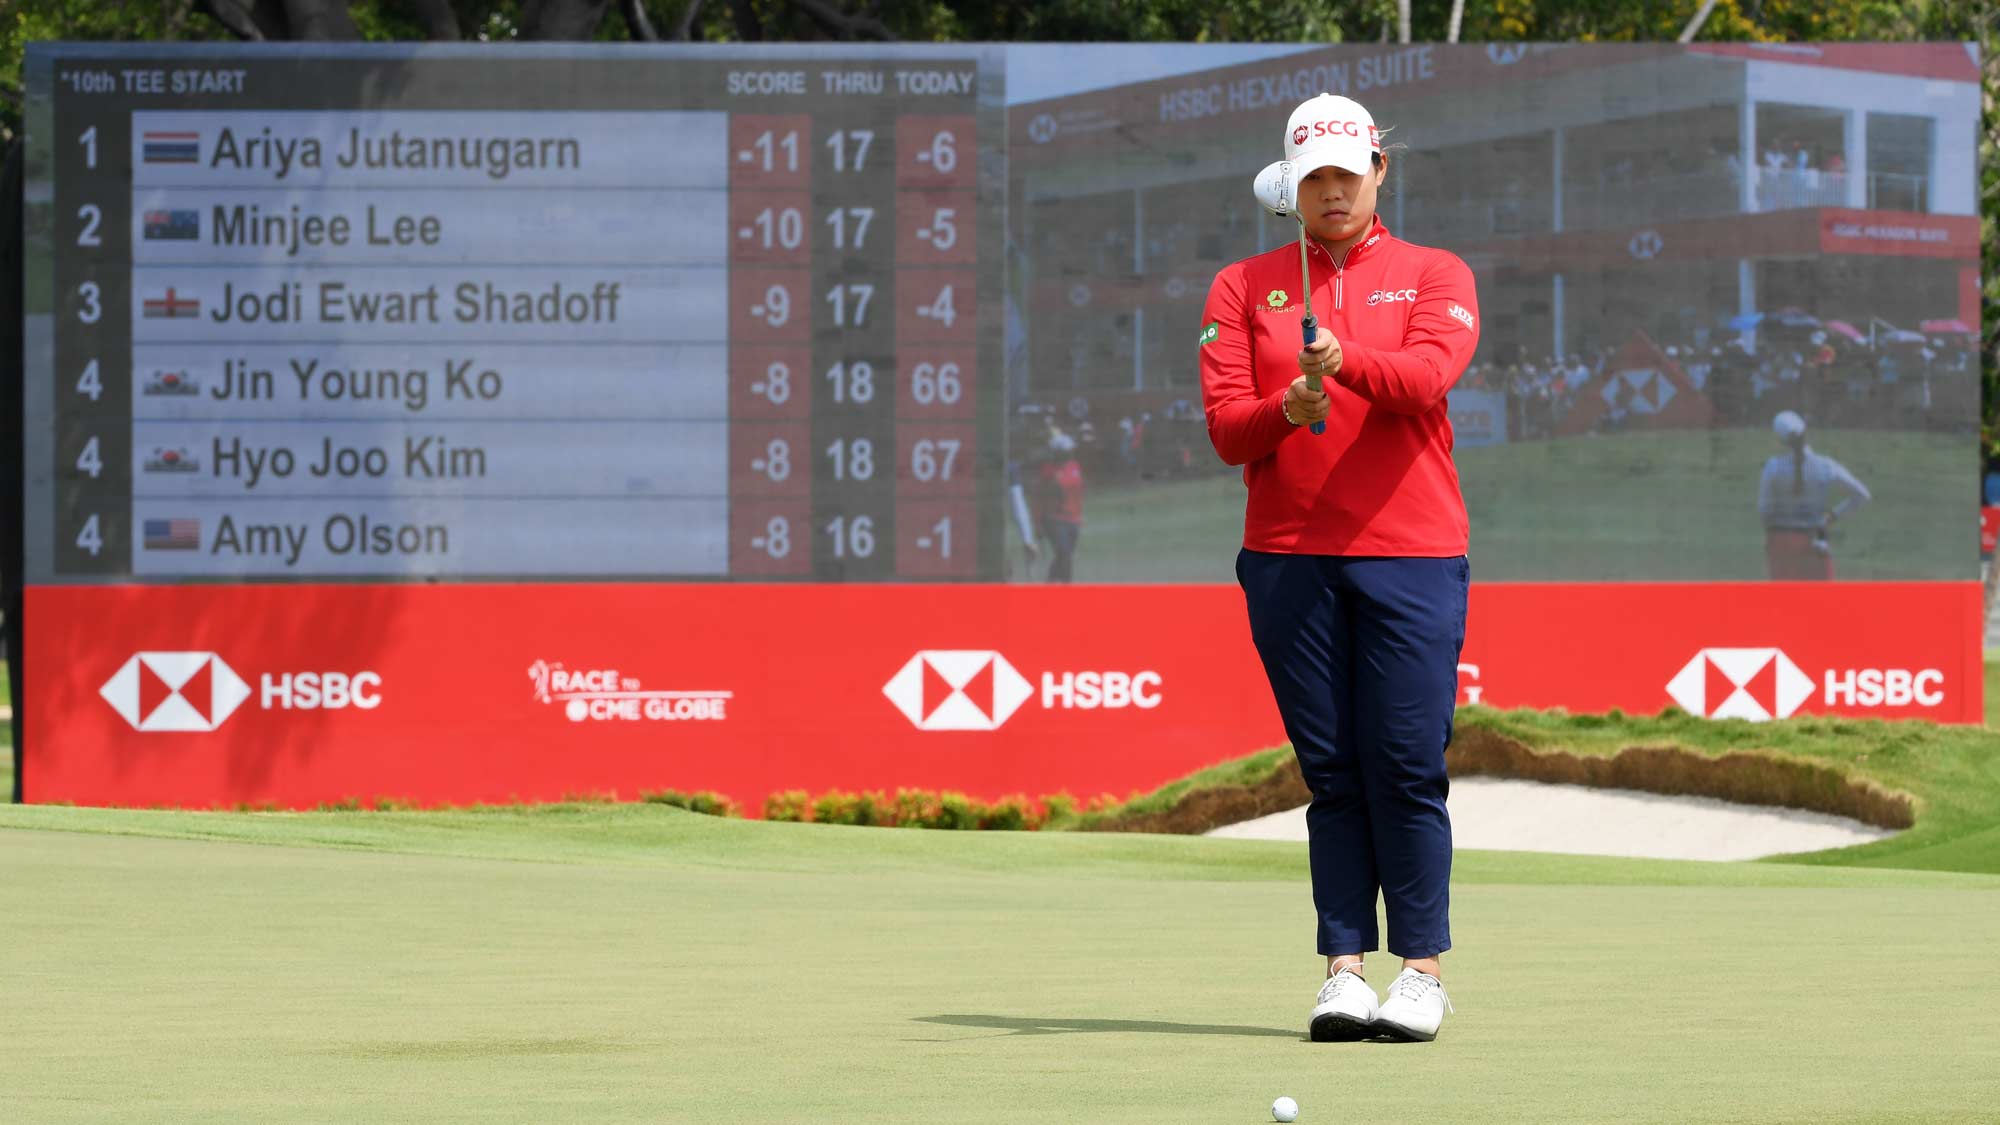 Ariya Jutanugarn of Thailand lines up a putt on the 18th green during the third round of the HSBC Women's World Championship at Sentosa Golf Club on March 02, 2019 in Singapore